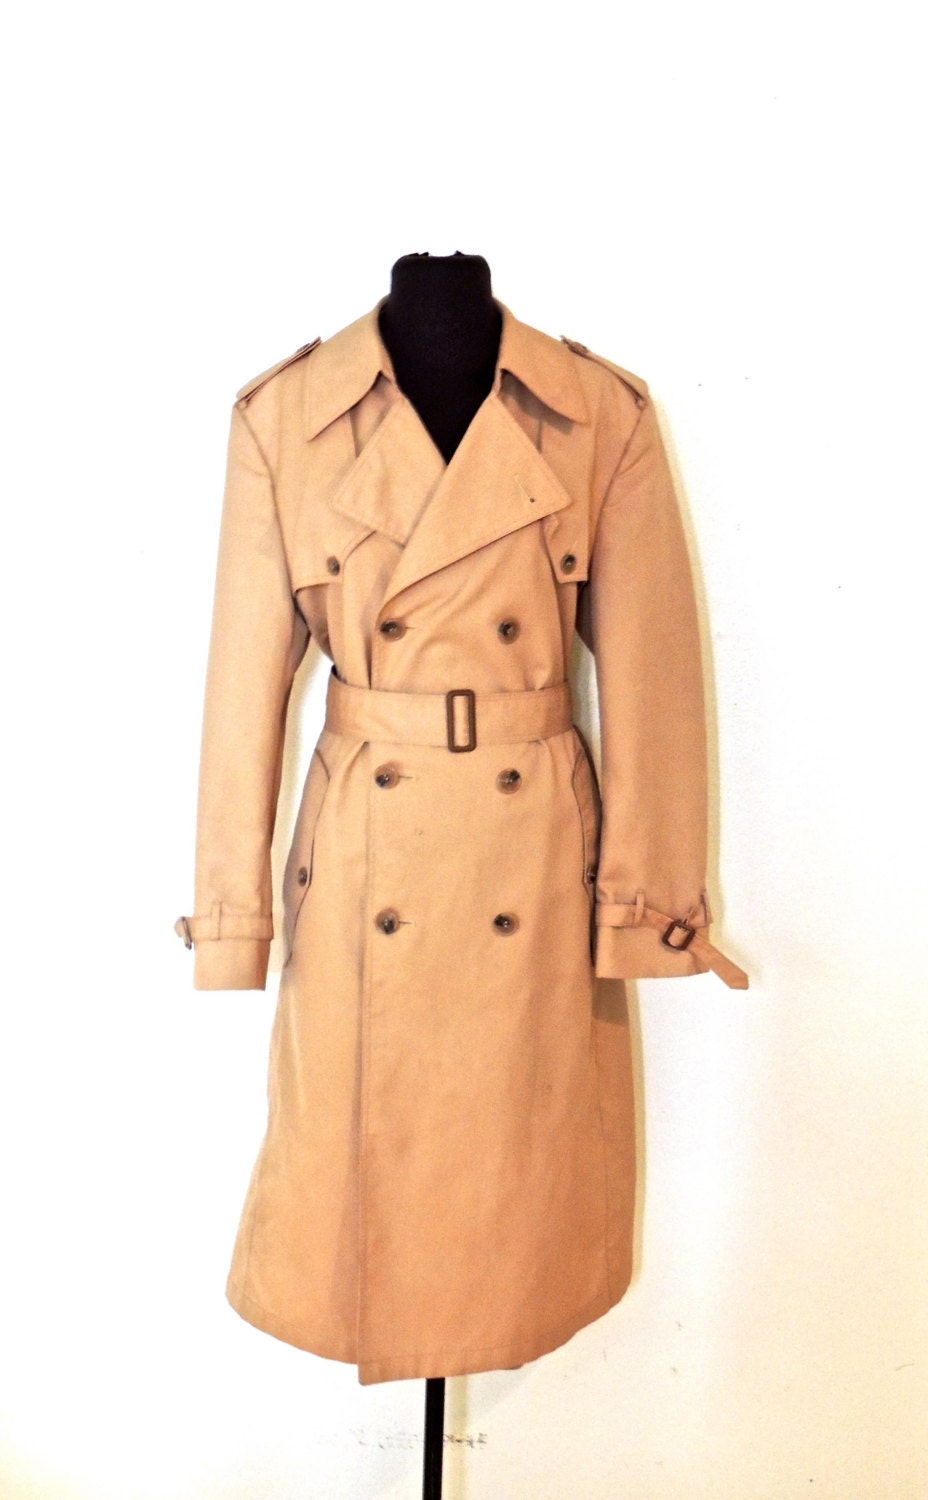 vintage Christian Dior trench coat 1970s authentic Dior